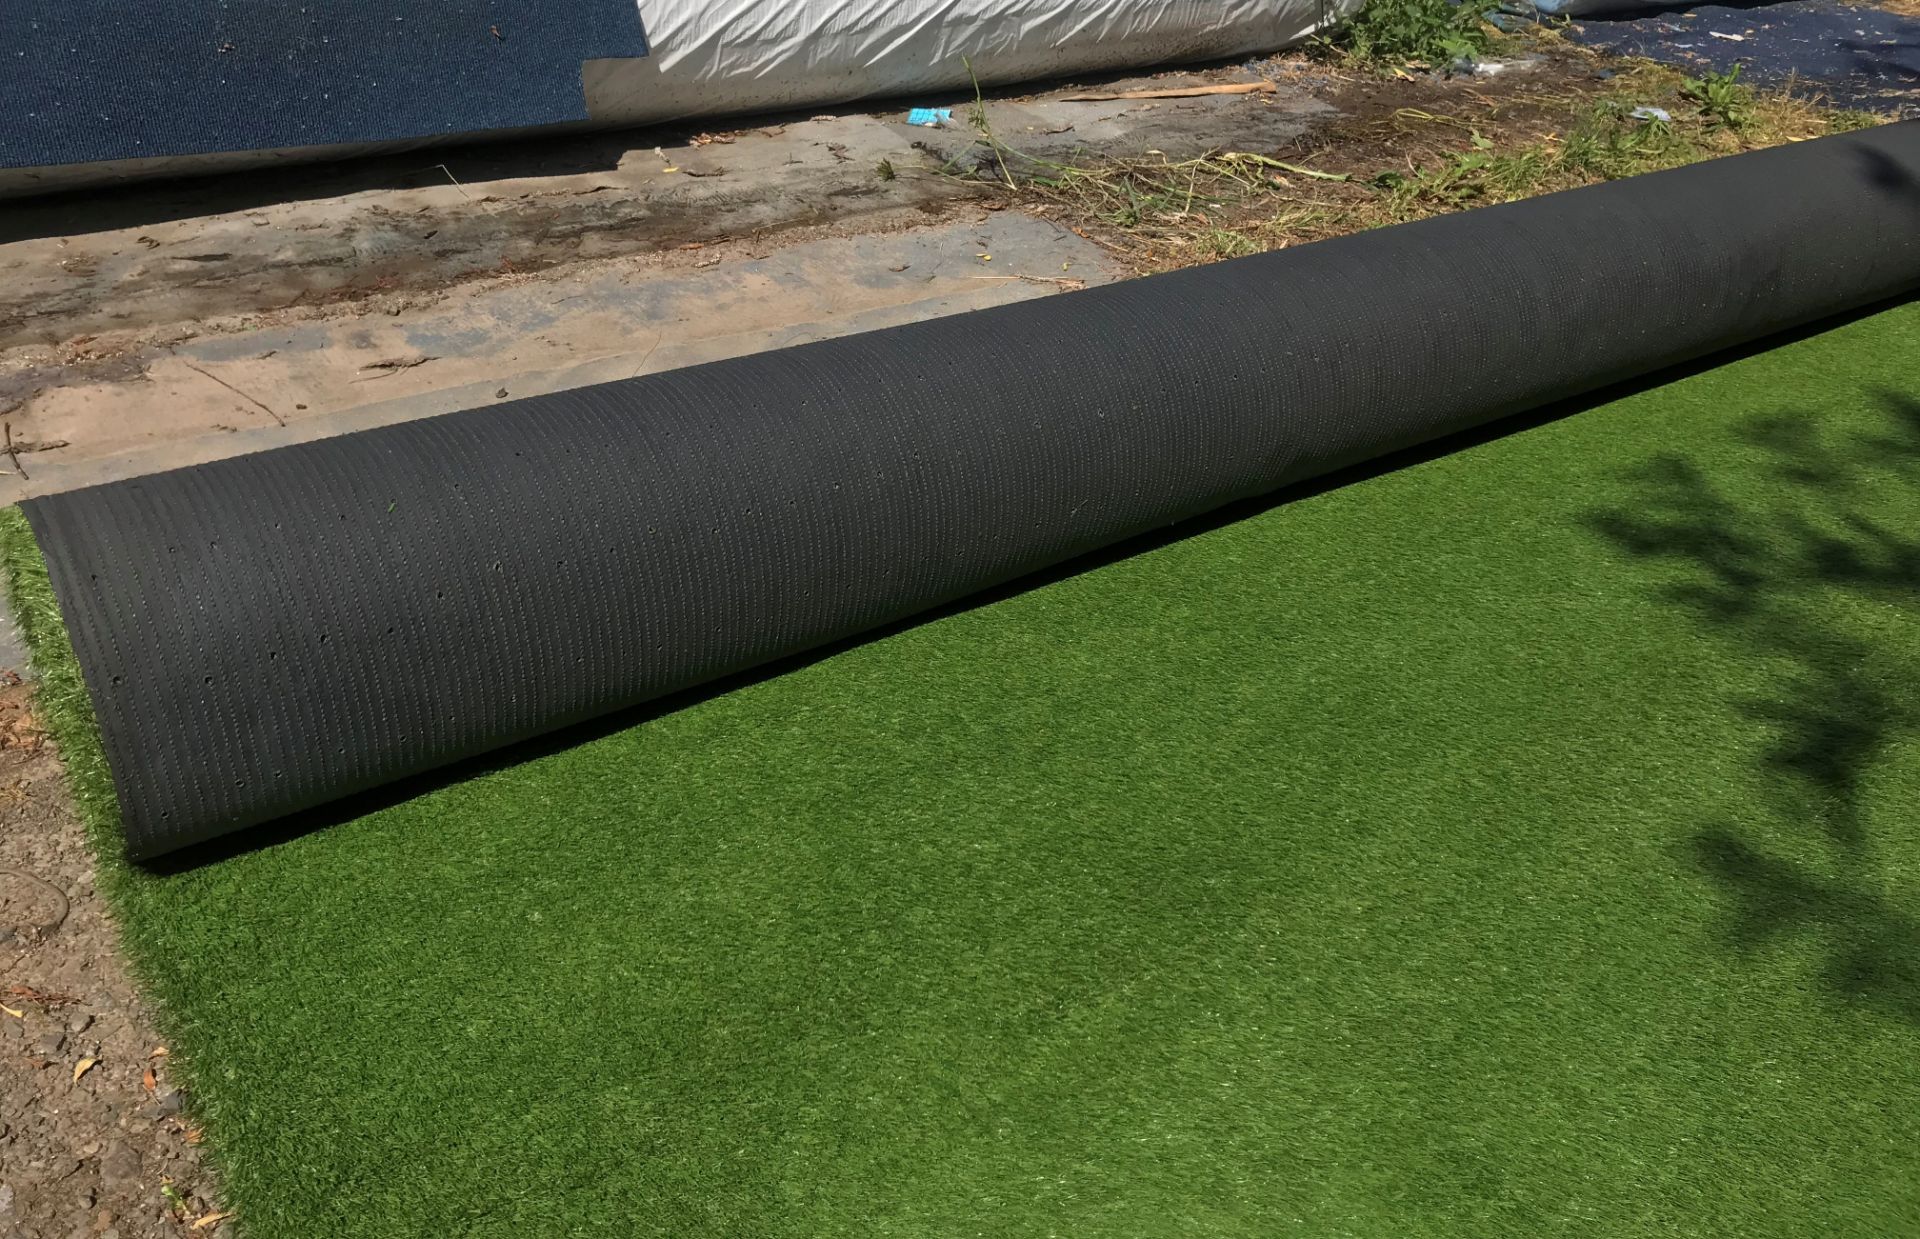 1 x Heavyweight Artificial Garden Grass - 40Mm Thick - 17.5X5M Roll - Rrp £32.99 Per Square - Image 2 of 5